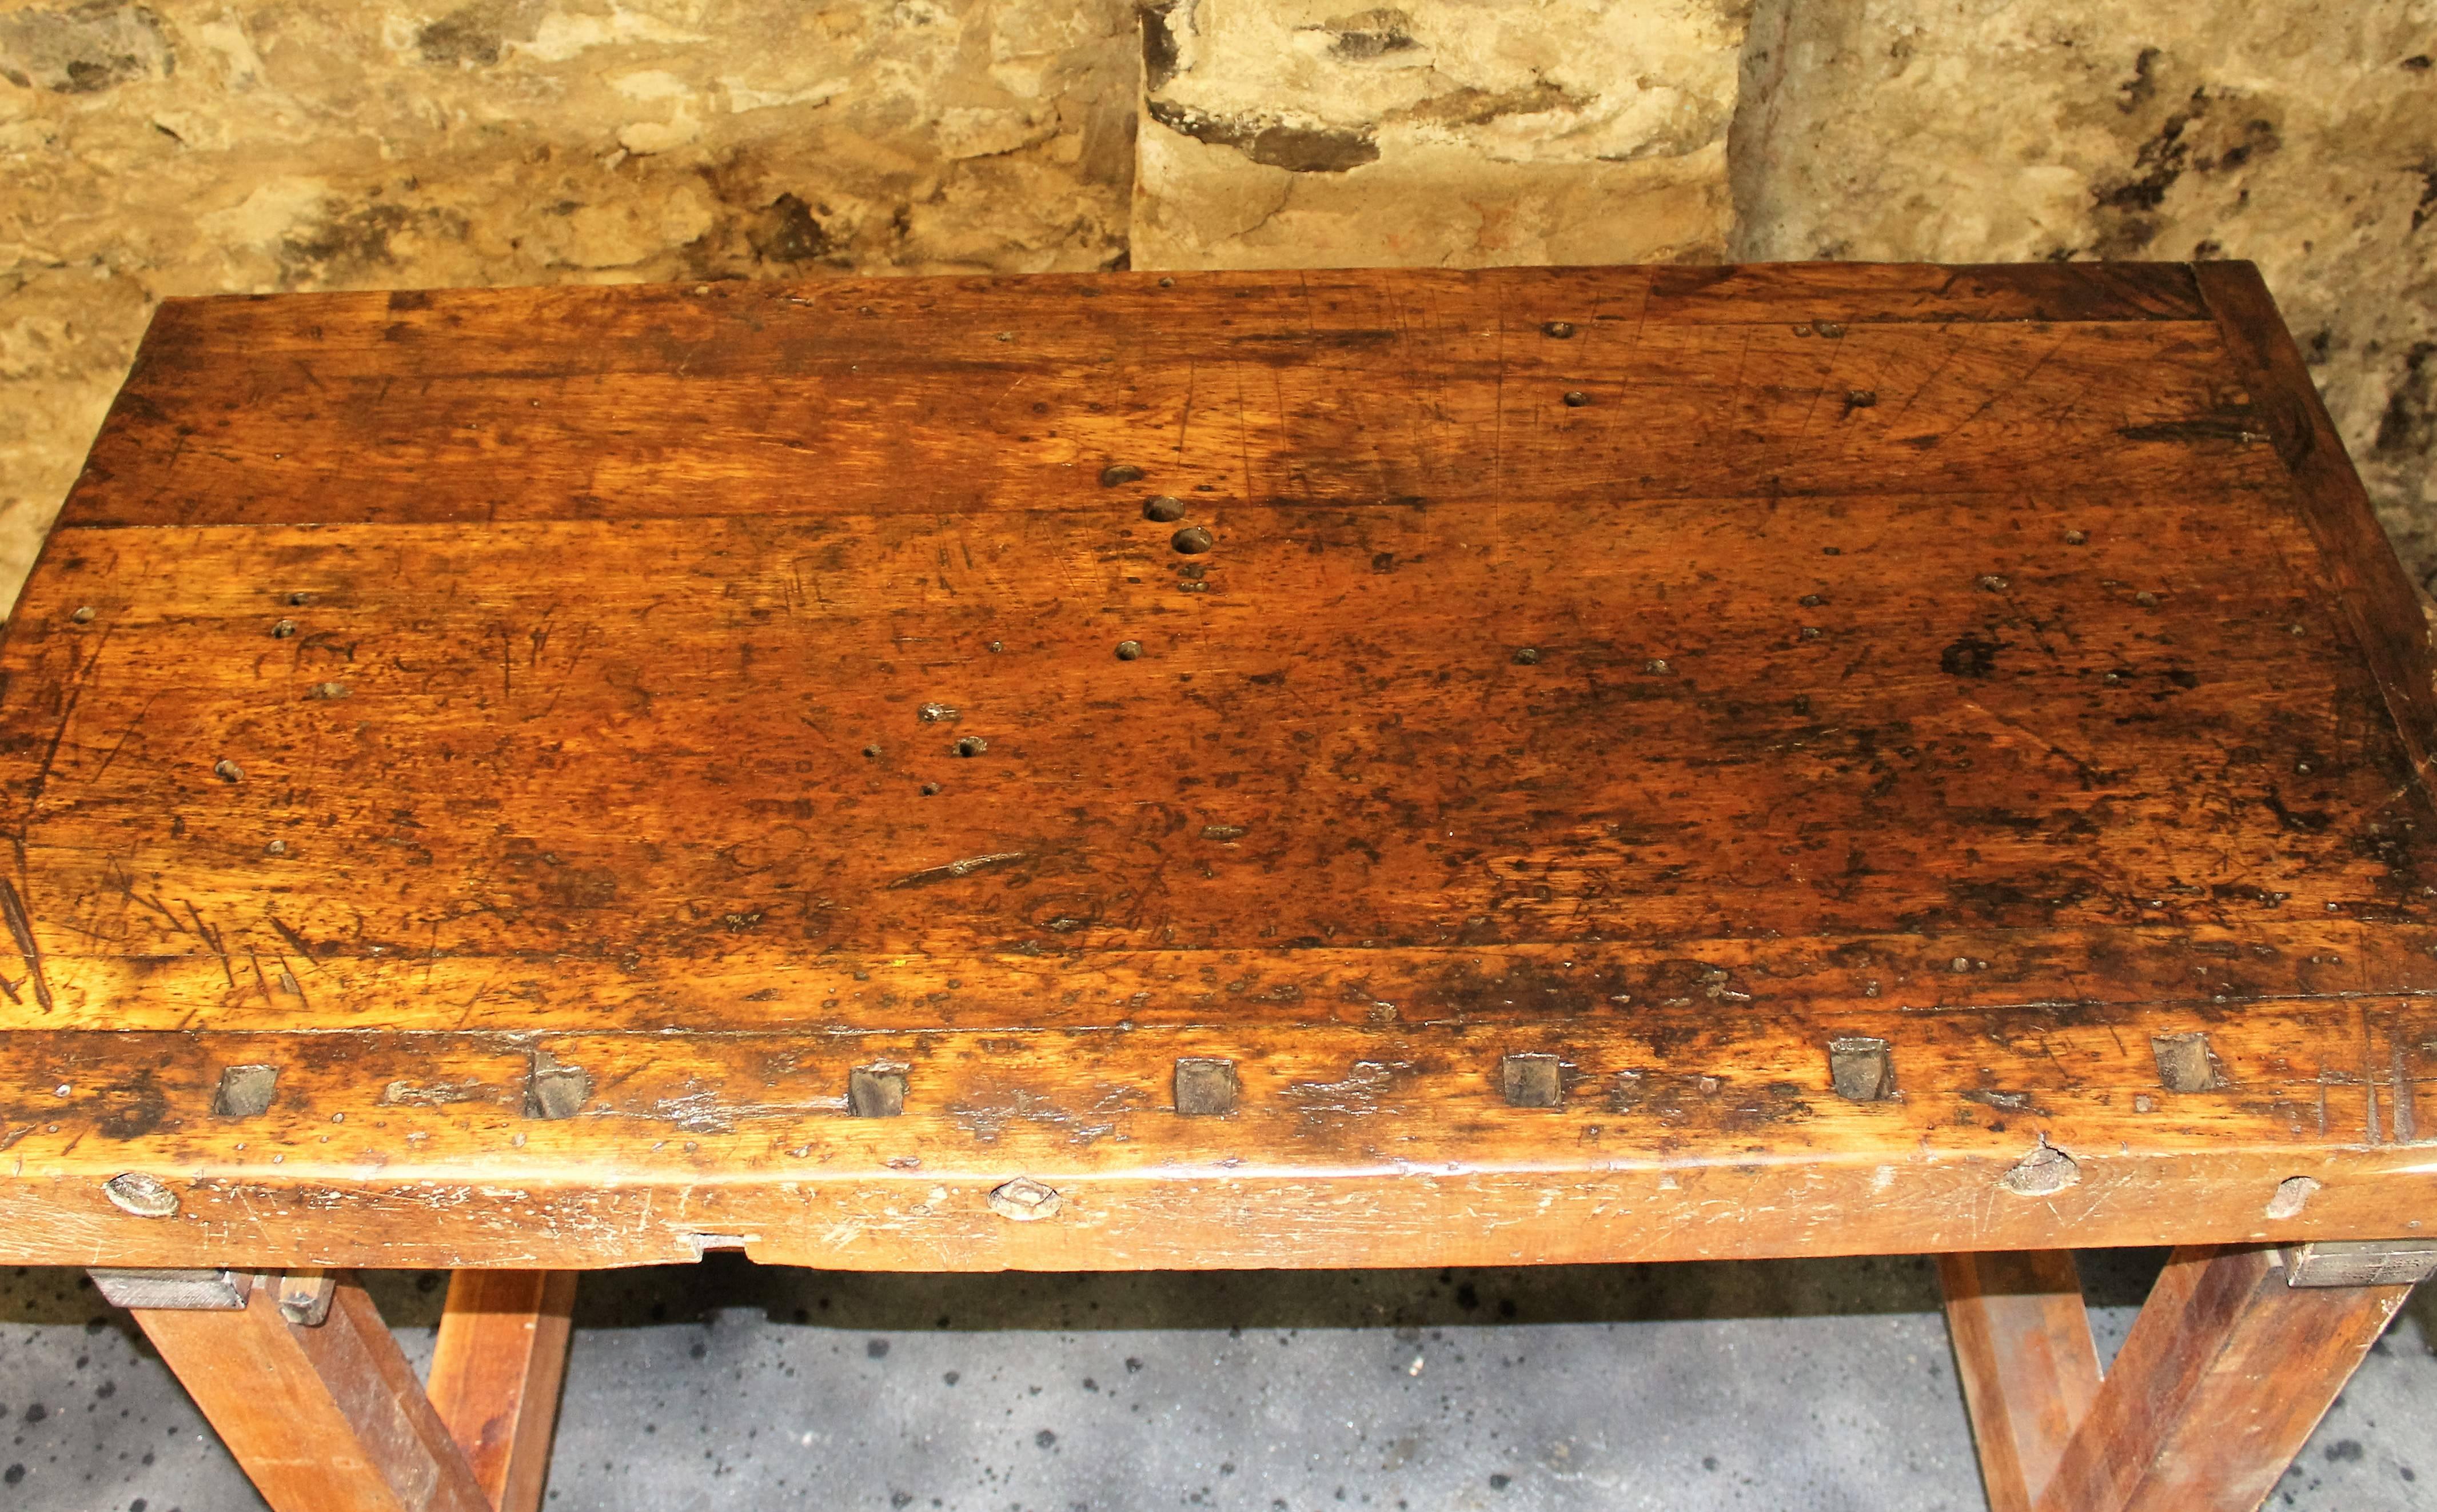 Beautiful old carpenter's bench with vice.